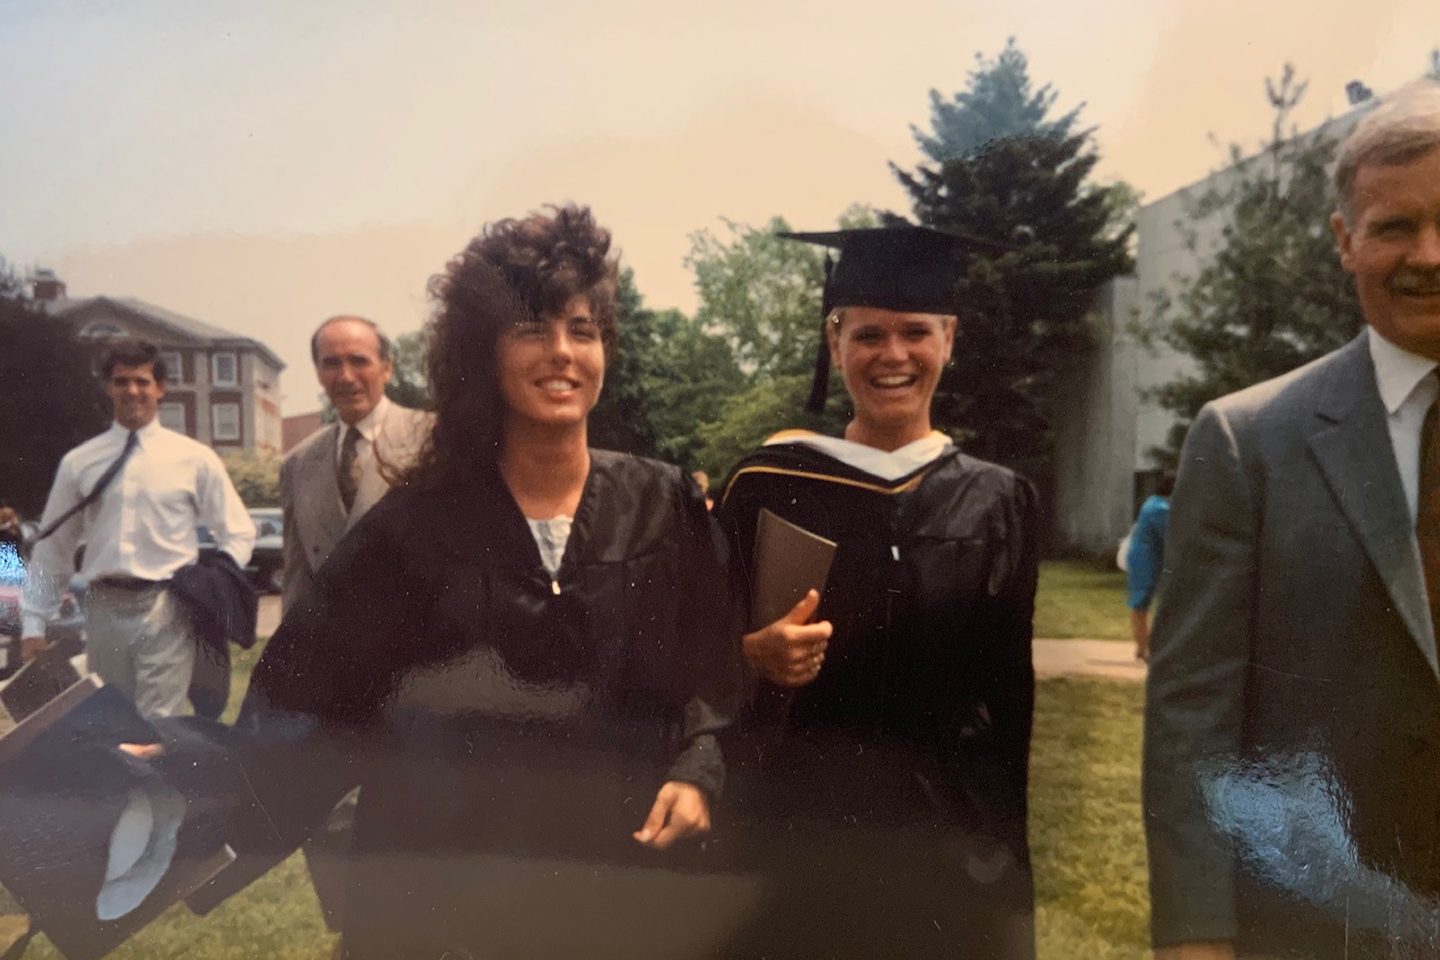 Two women in graduation attire, half of man seen off to the right